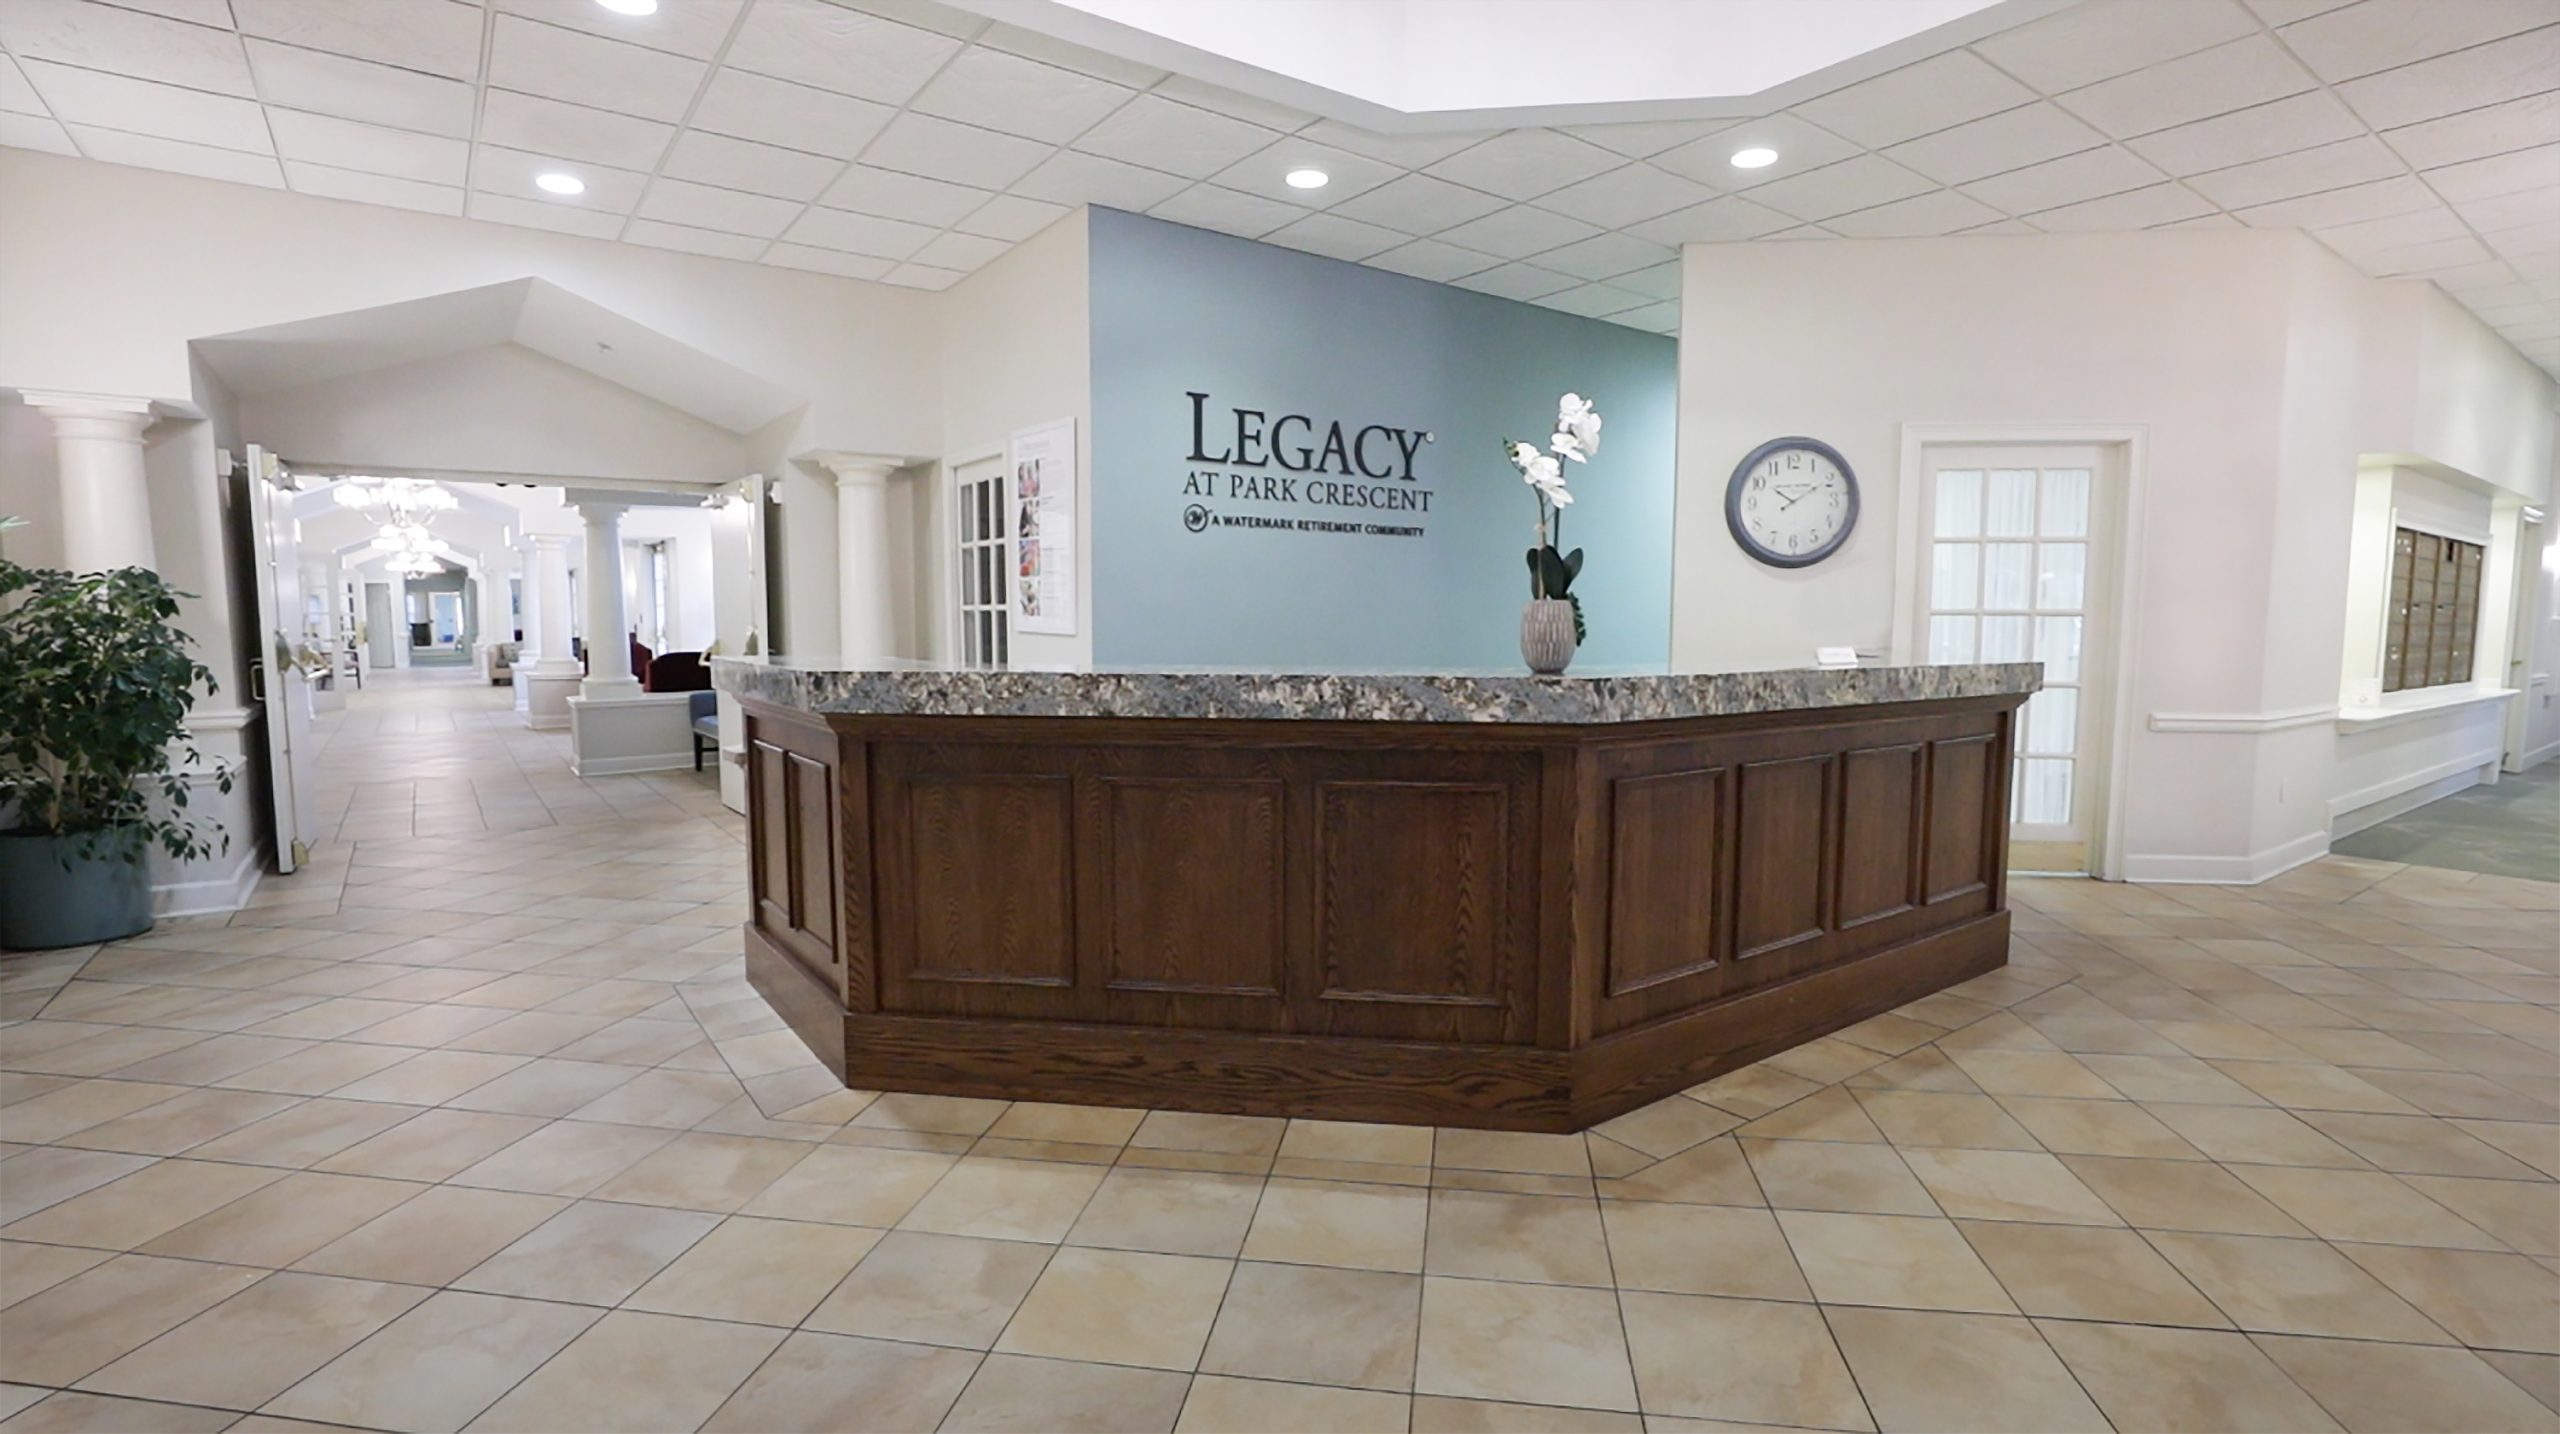 Legacy at Park Crescent image